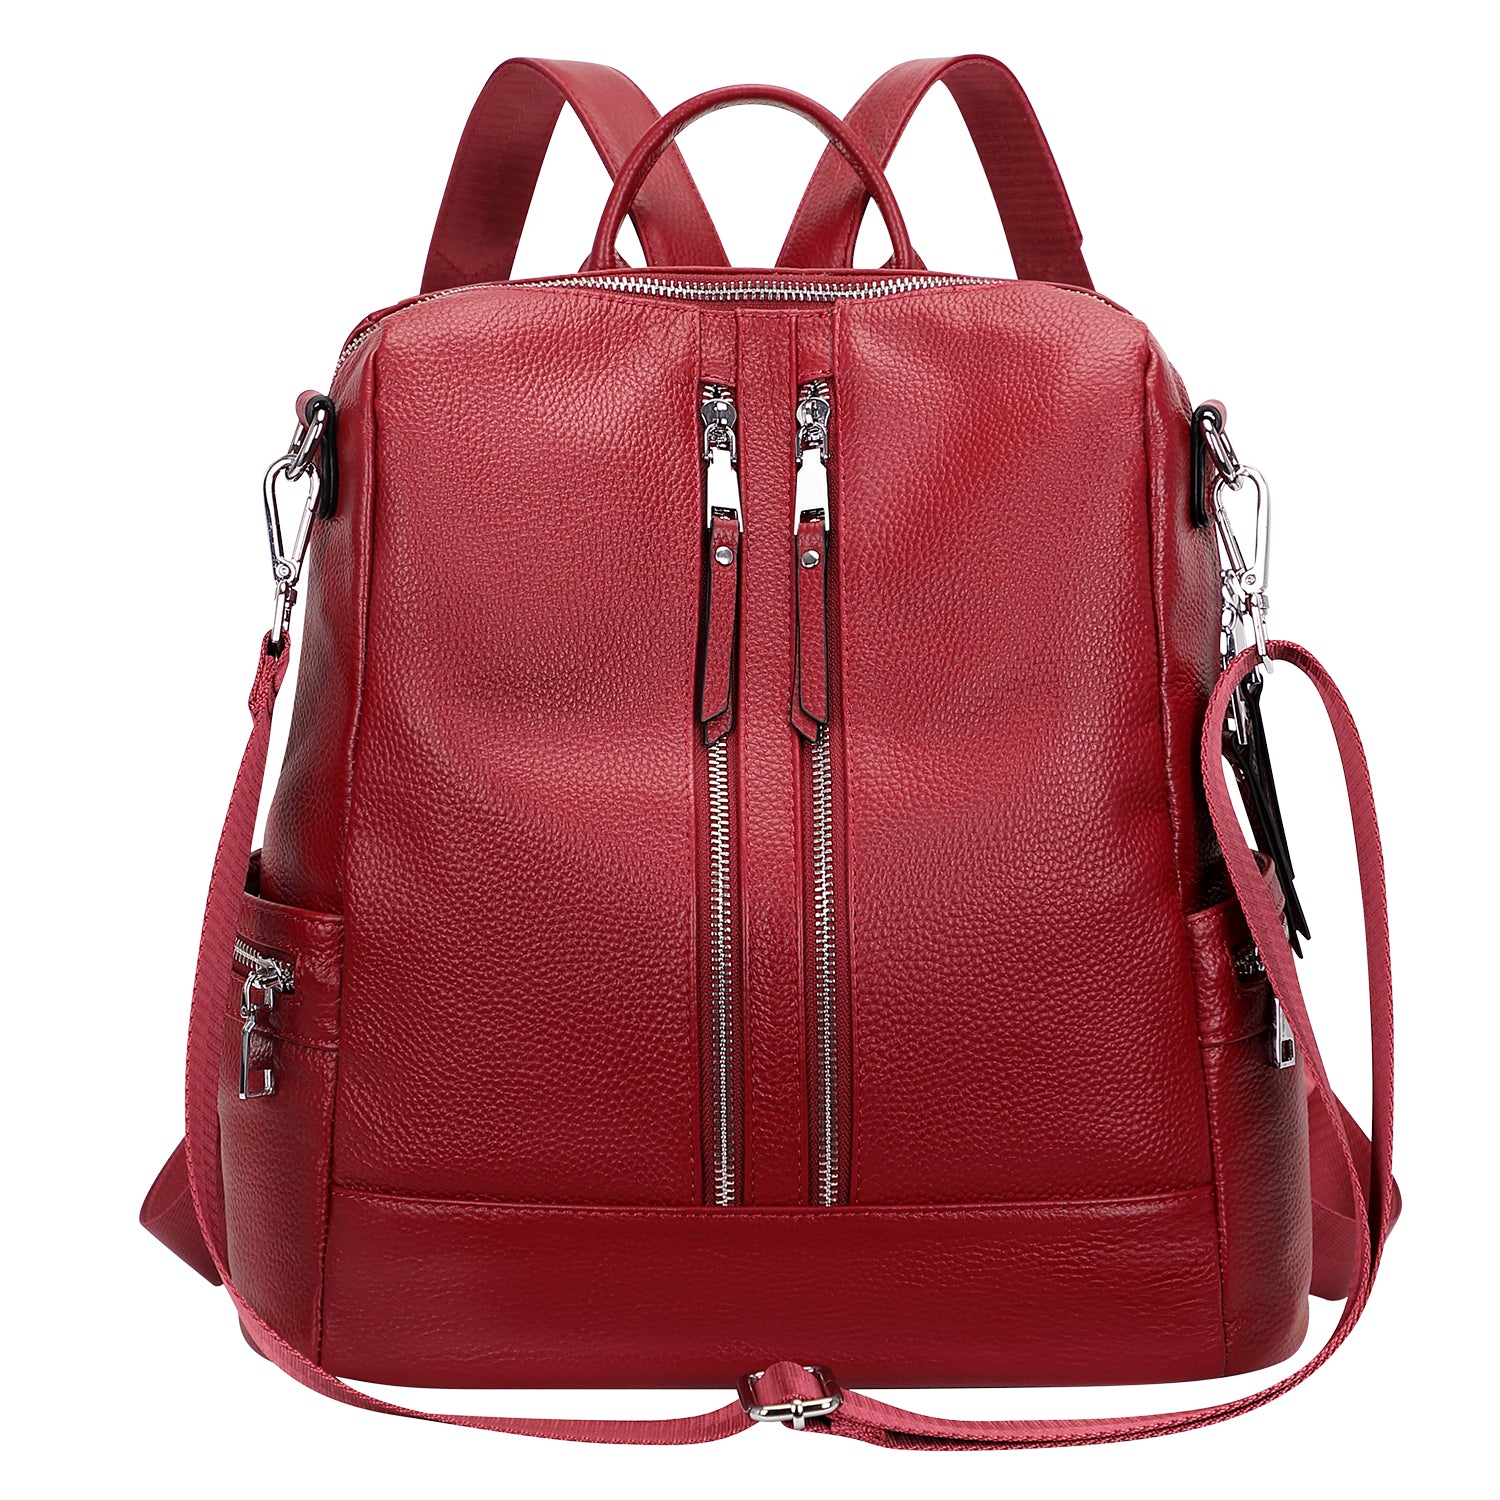 ALTOSY Genuine Leather Backpack Purse for Women Convertible